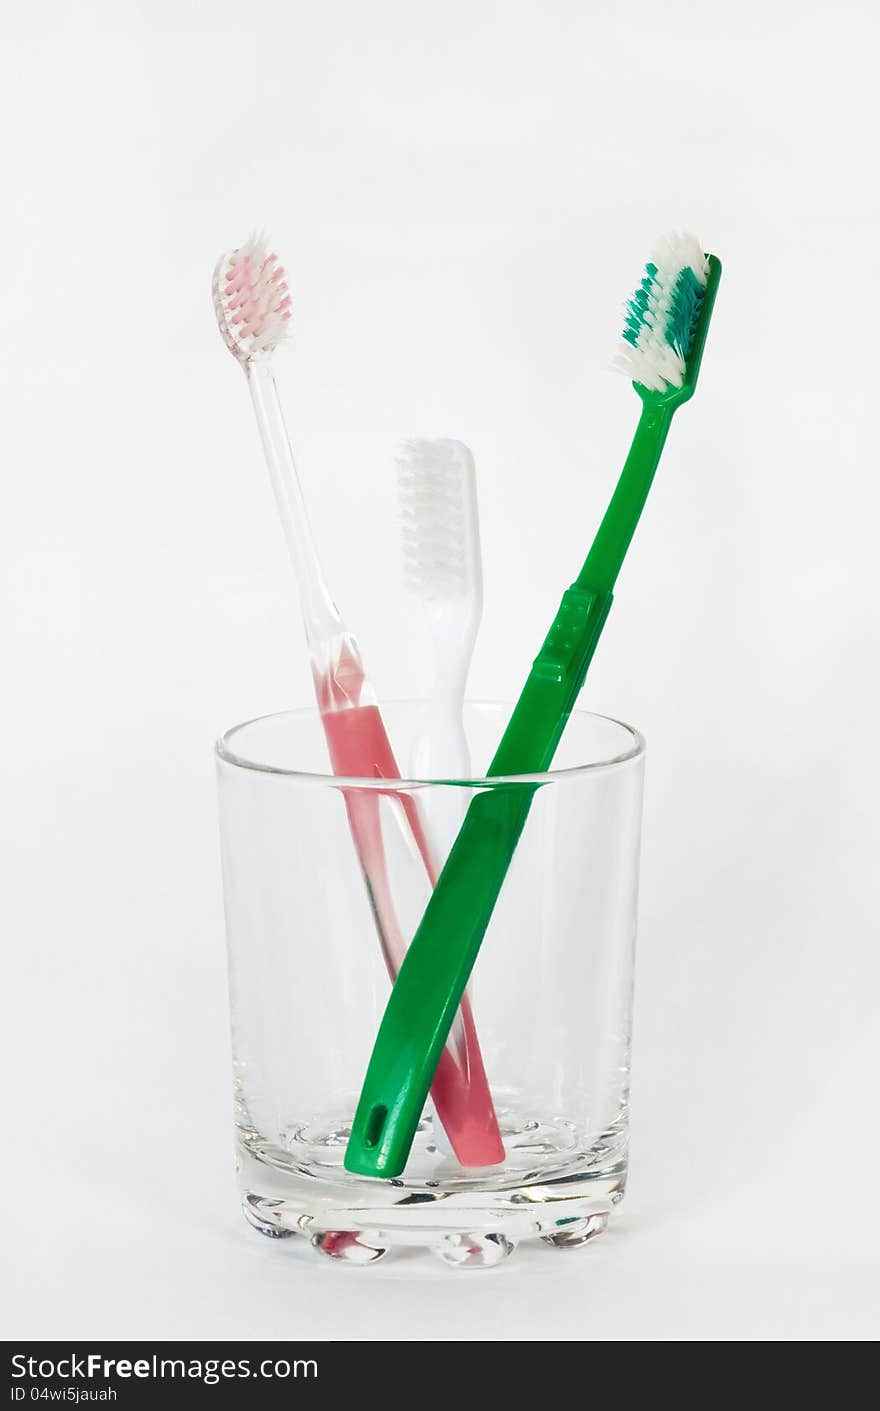 Three toothbrushes in a glass beaker on a white background